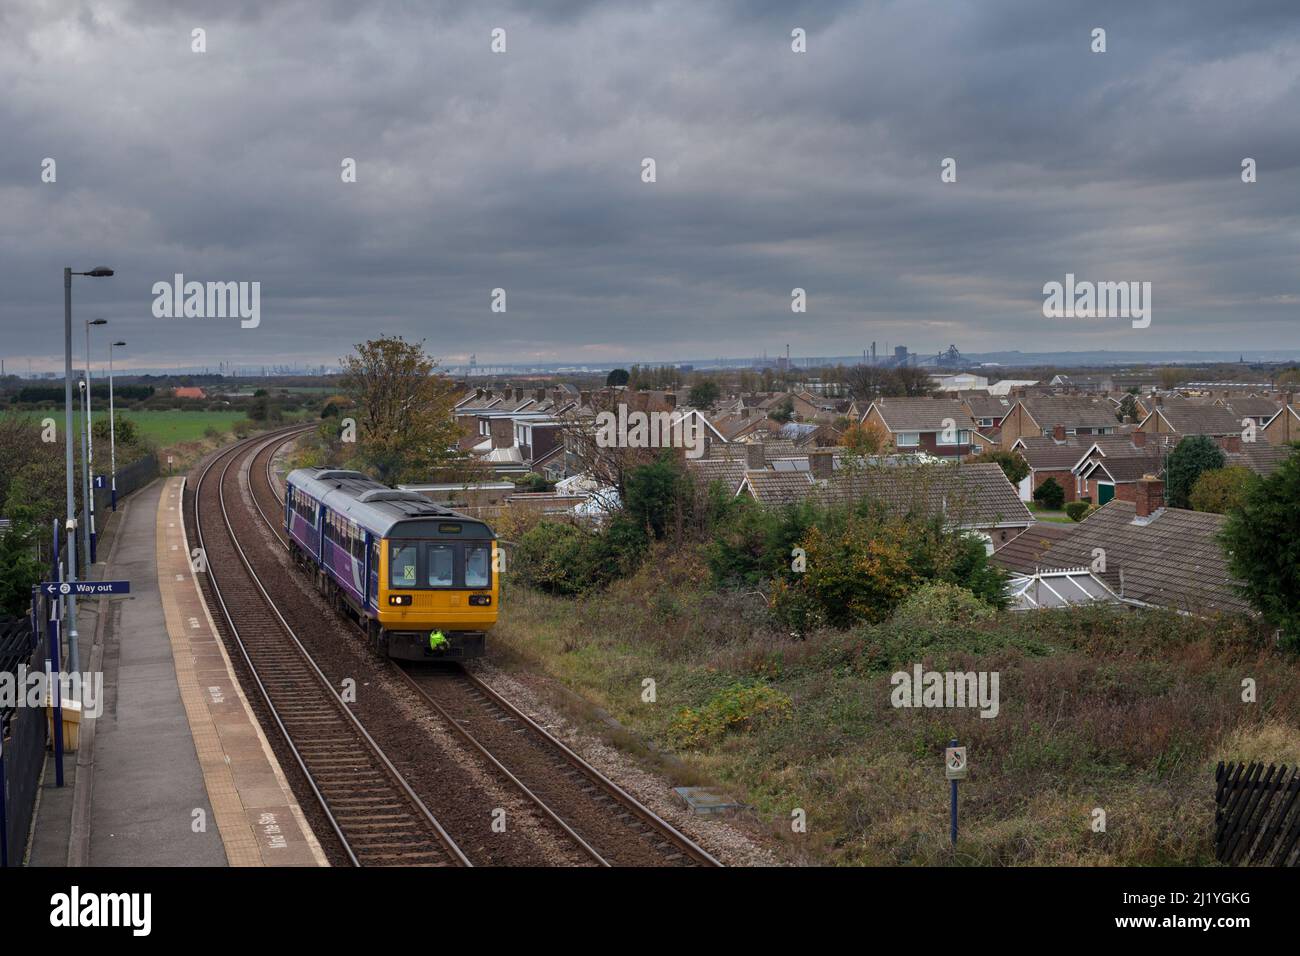 Northern rail class 142 pacer train 142067 arriving at Marske railway station, Teesside Stock Photo